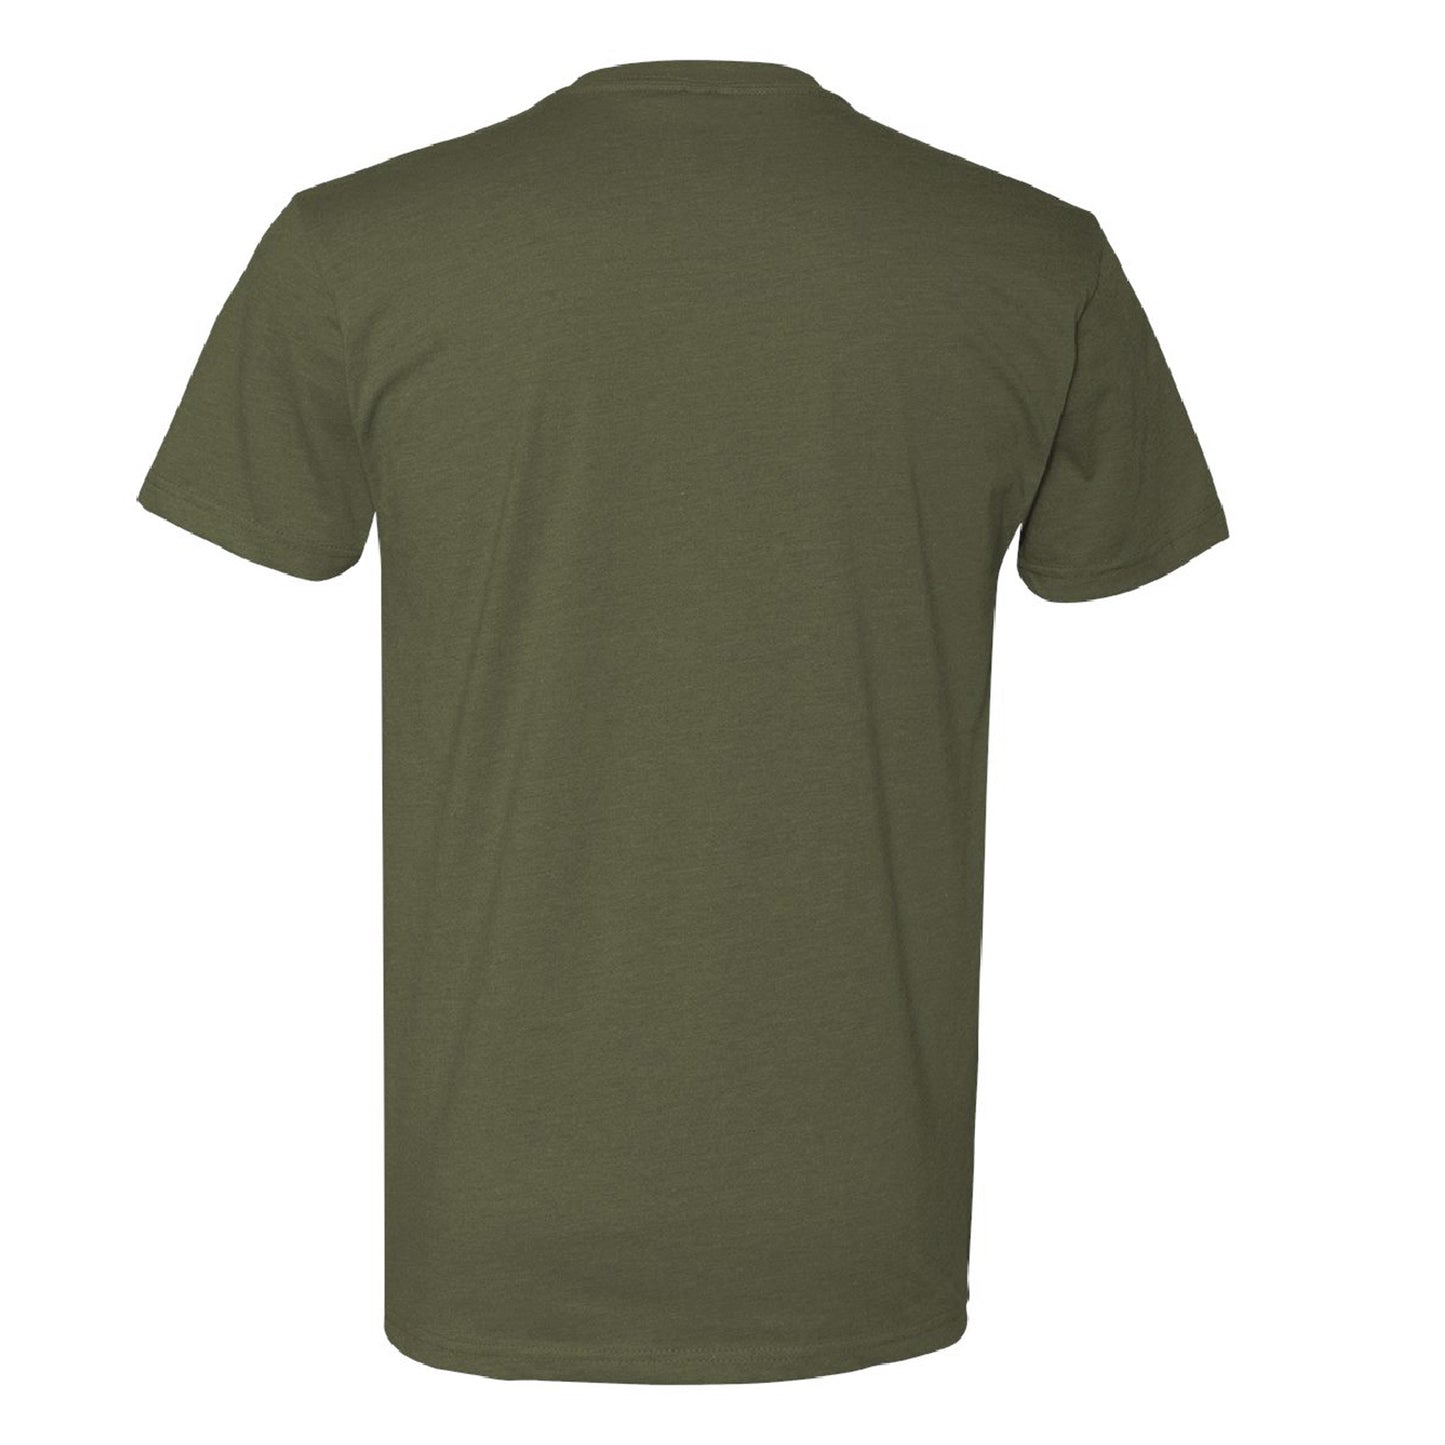 The Cups Tee Forest Green (Short Sleeve)